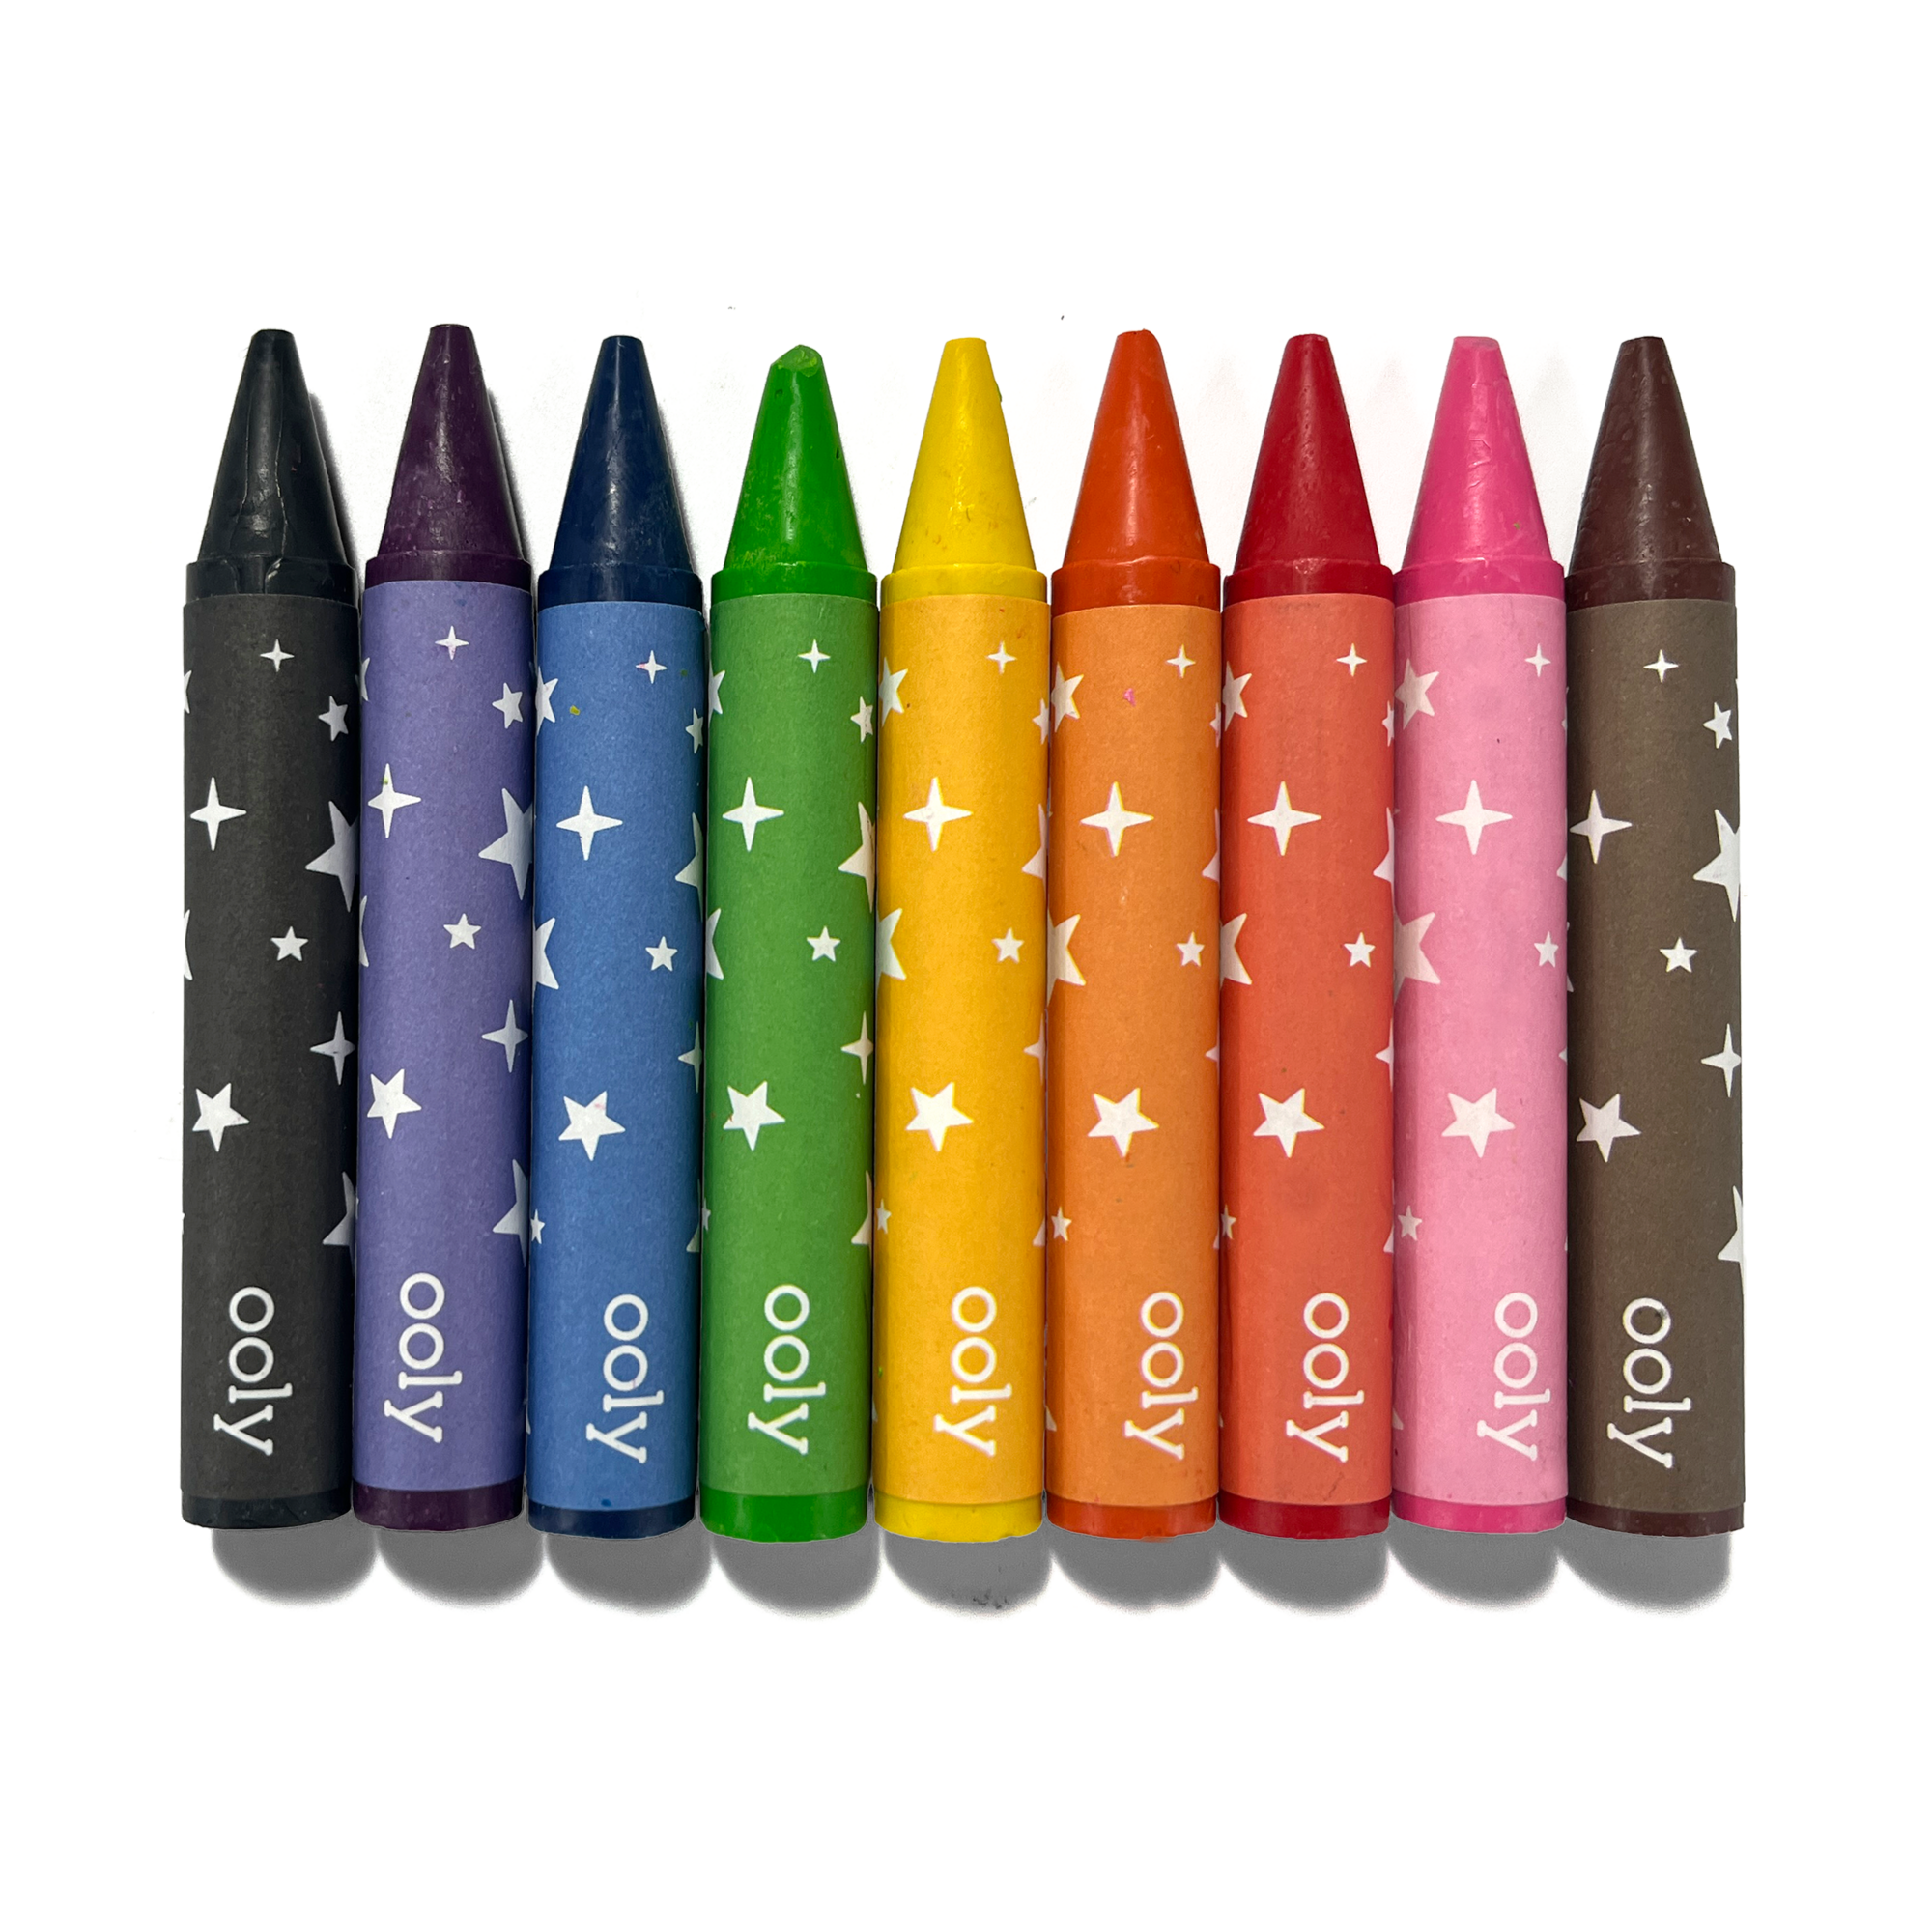 OOLY Carry Along! Coloring Book and Crayon Set - Unicorn Pals crayons in a row